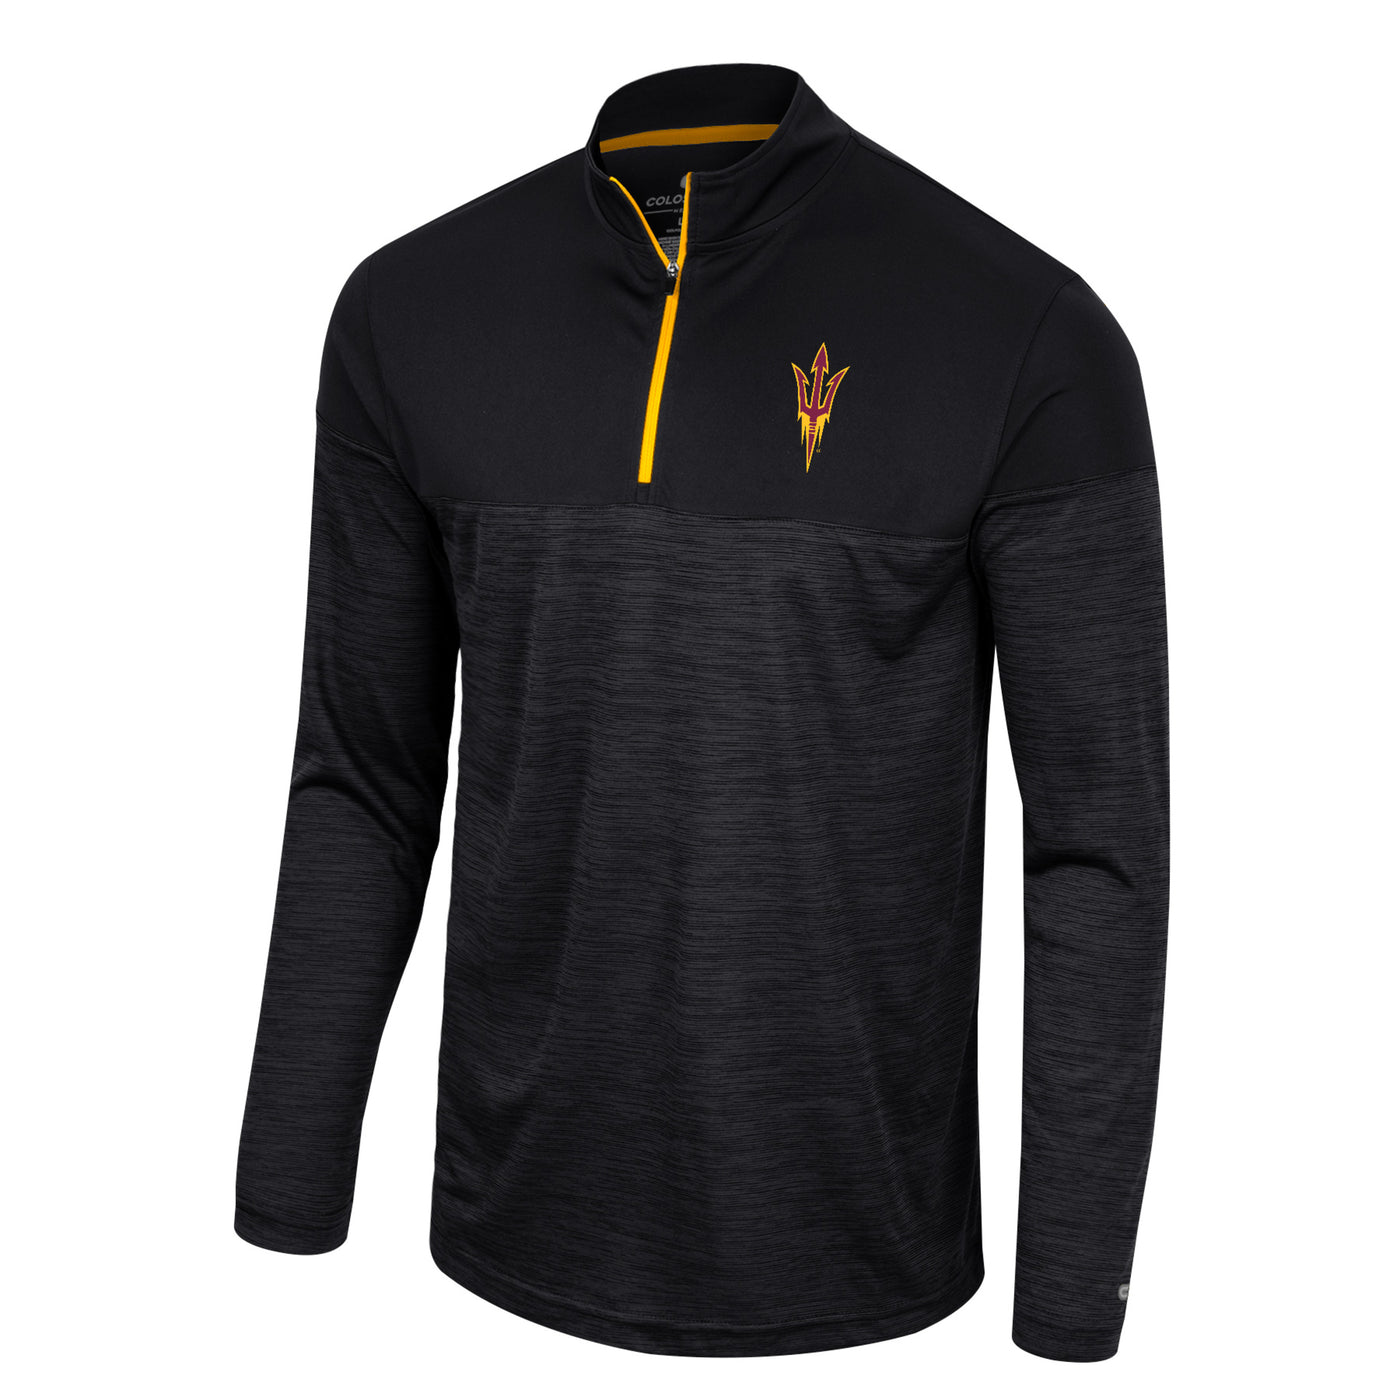 ASU black 1/4 zip jacket with a pitchfork on the chest 